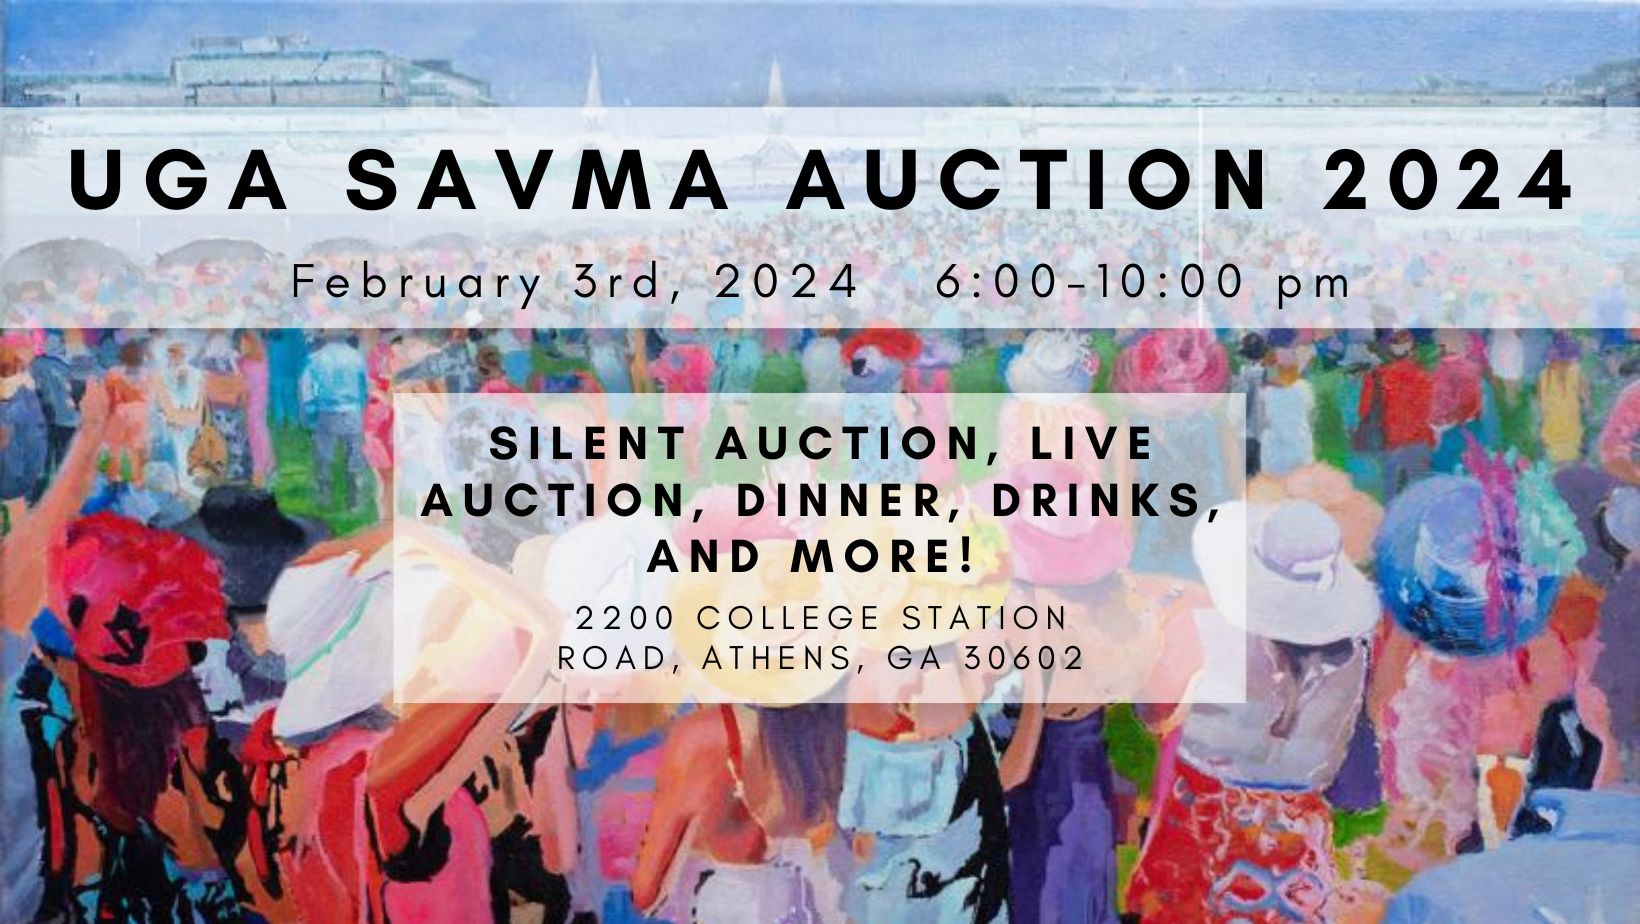 SAVMA Auction 2024 Banner with text: "Silent auction, live auction, dinner, drinks, and more!"